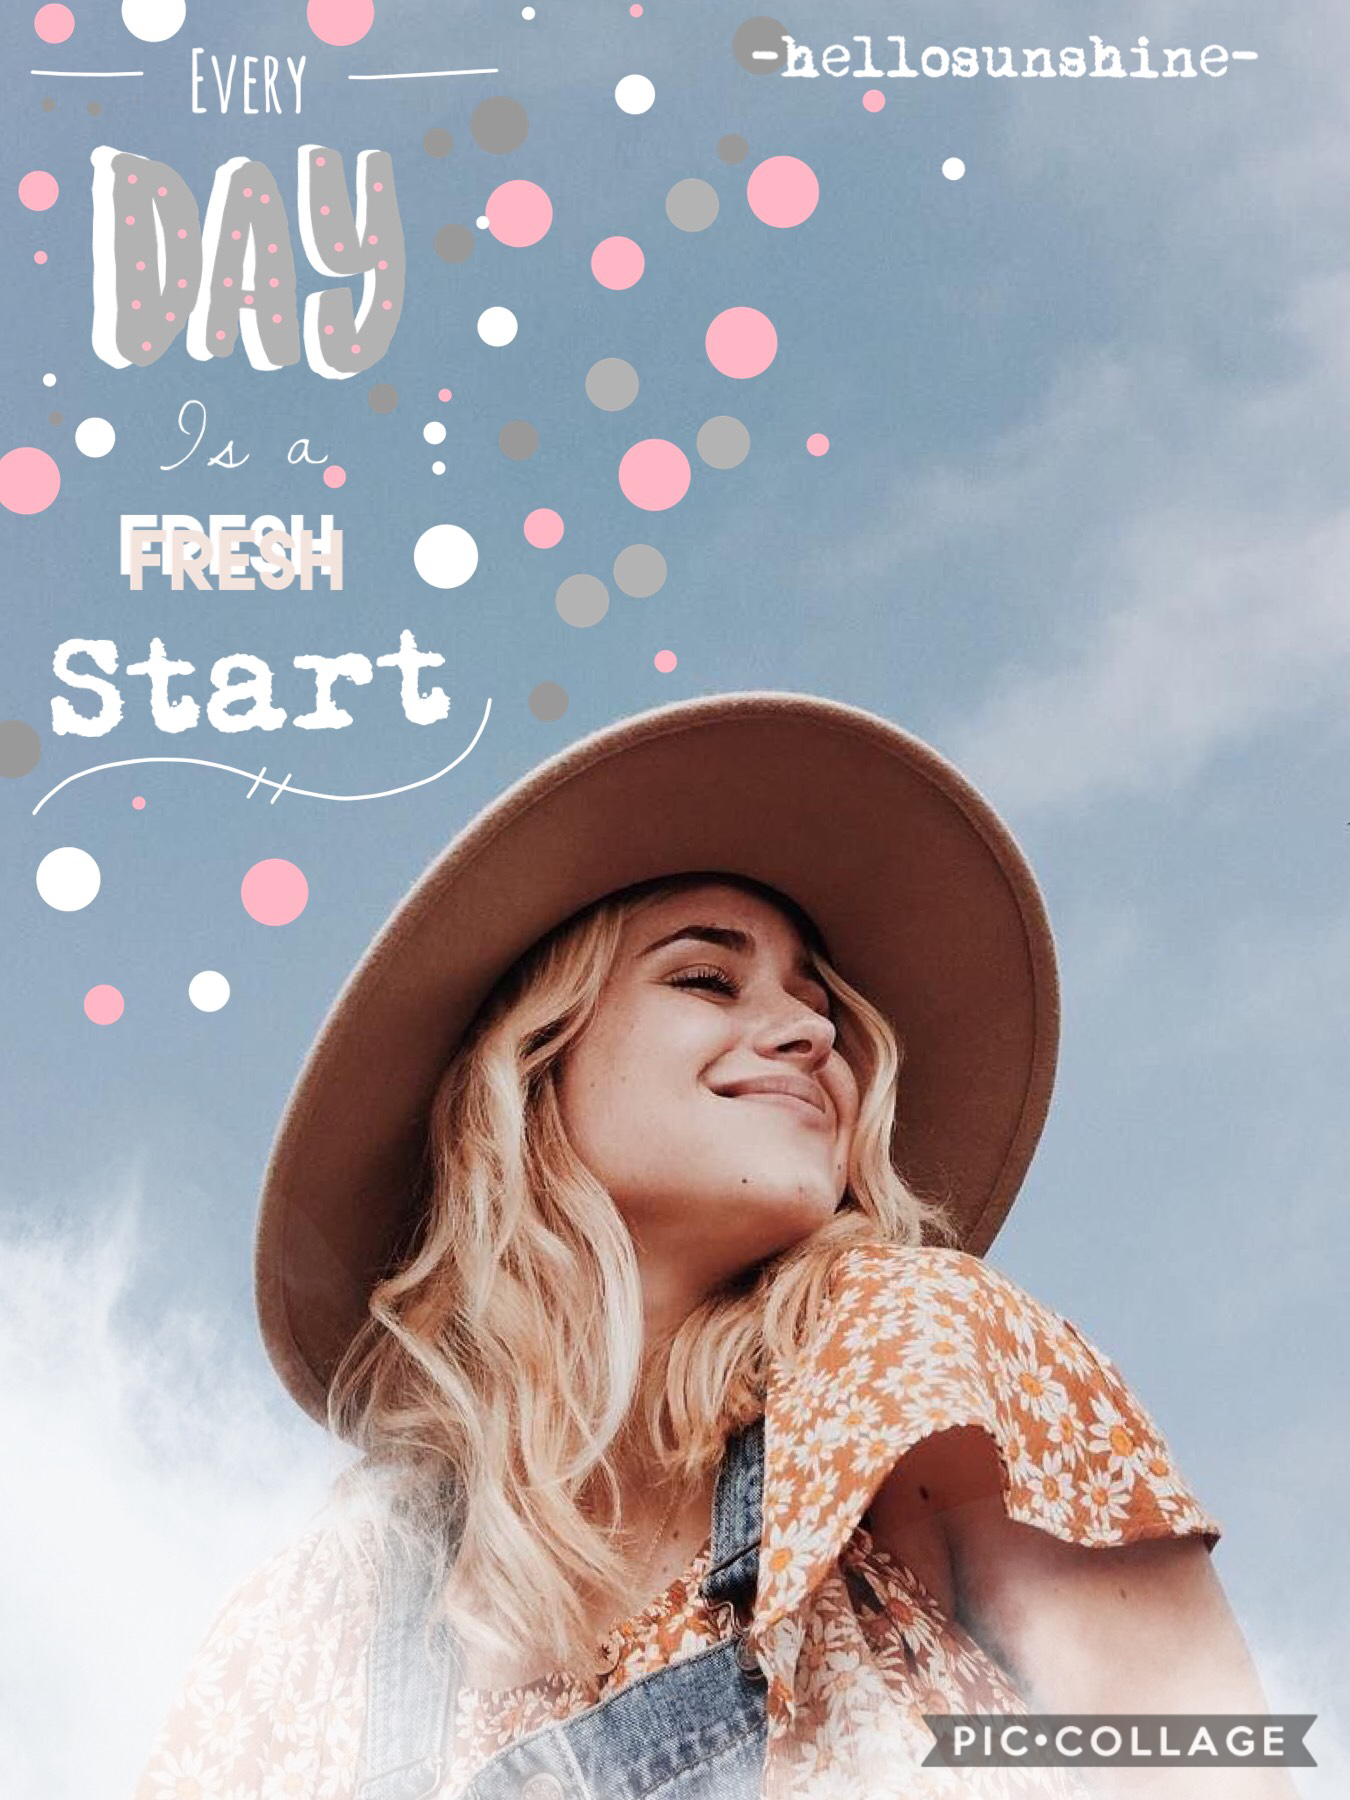 Every day is a fresh start 😊❤️🌟